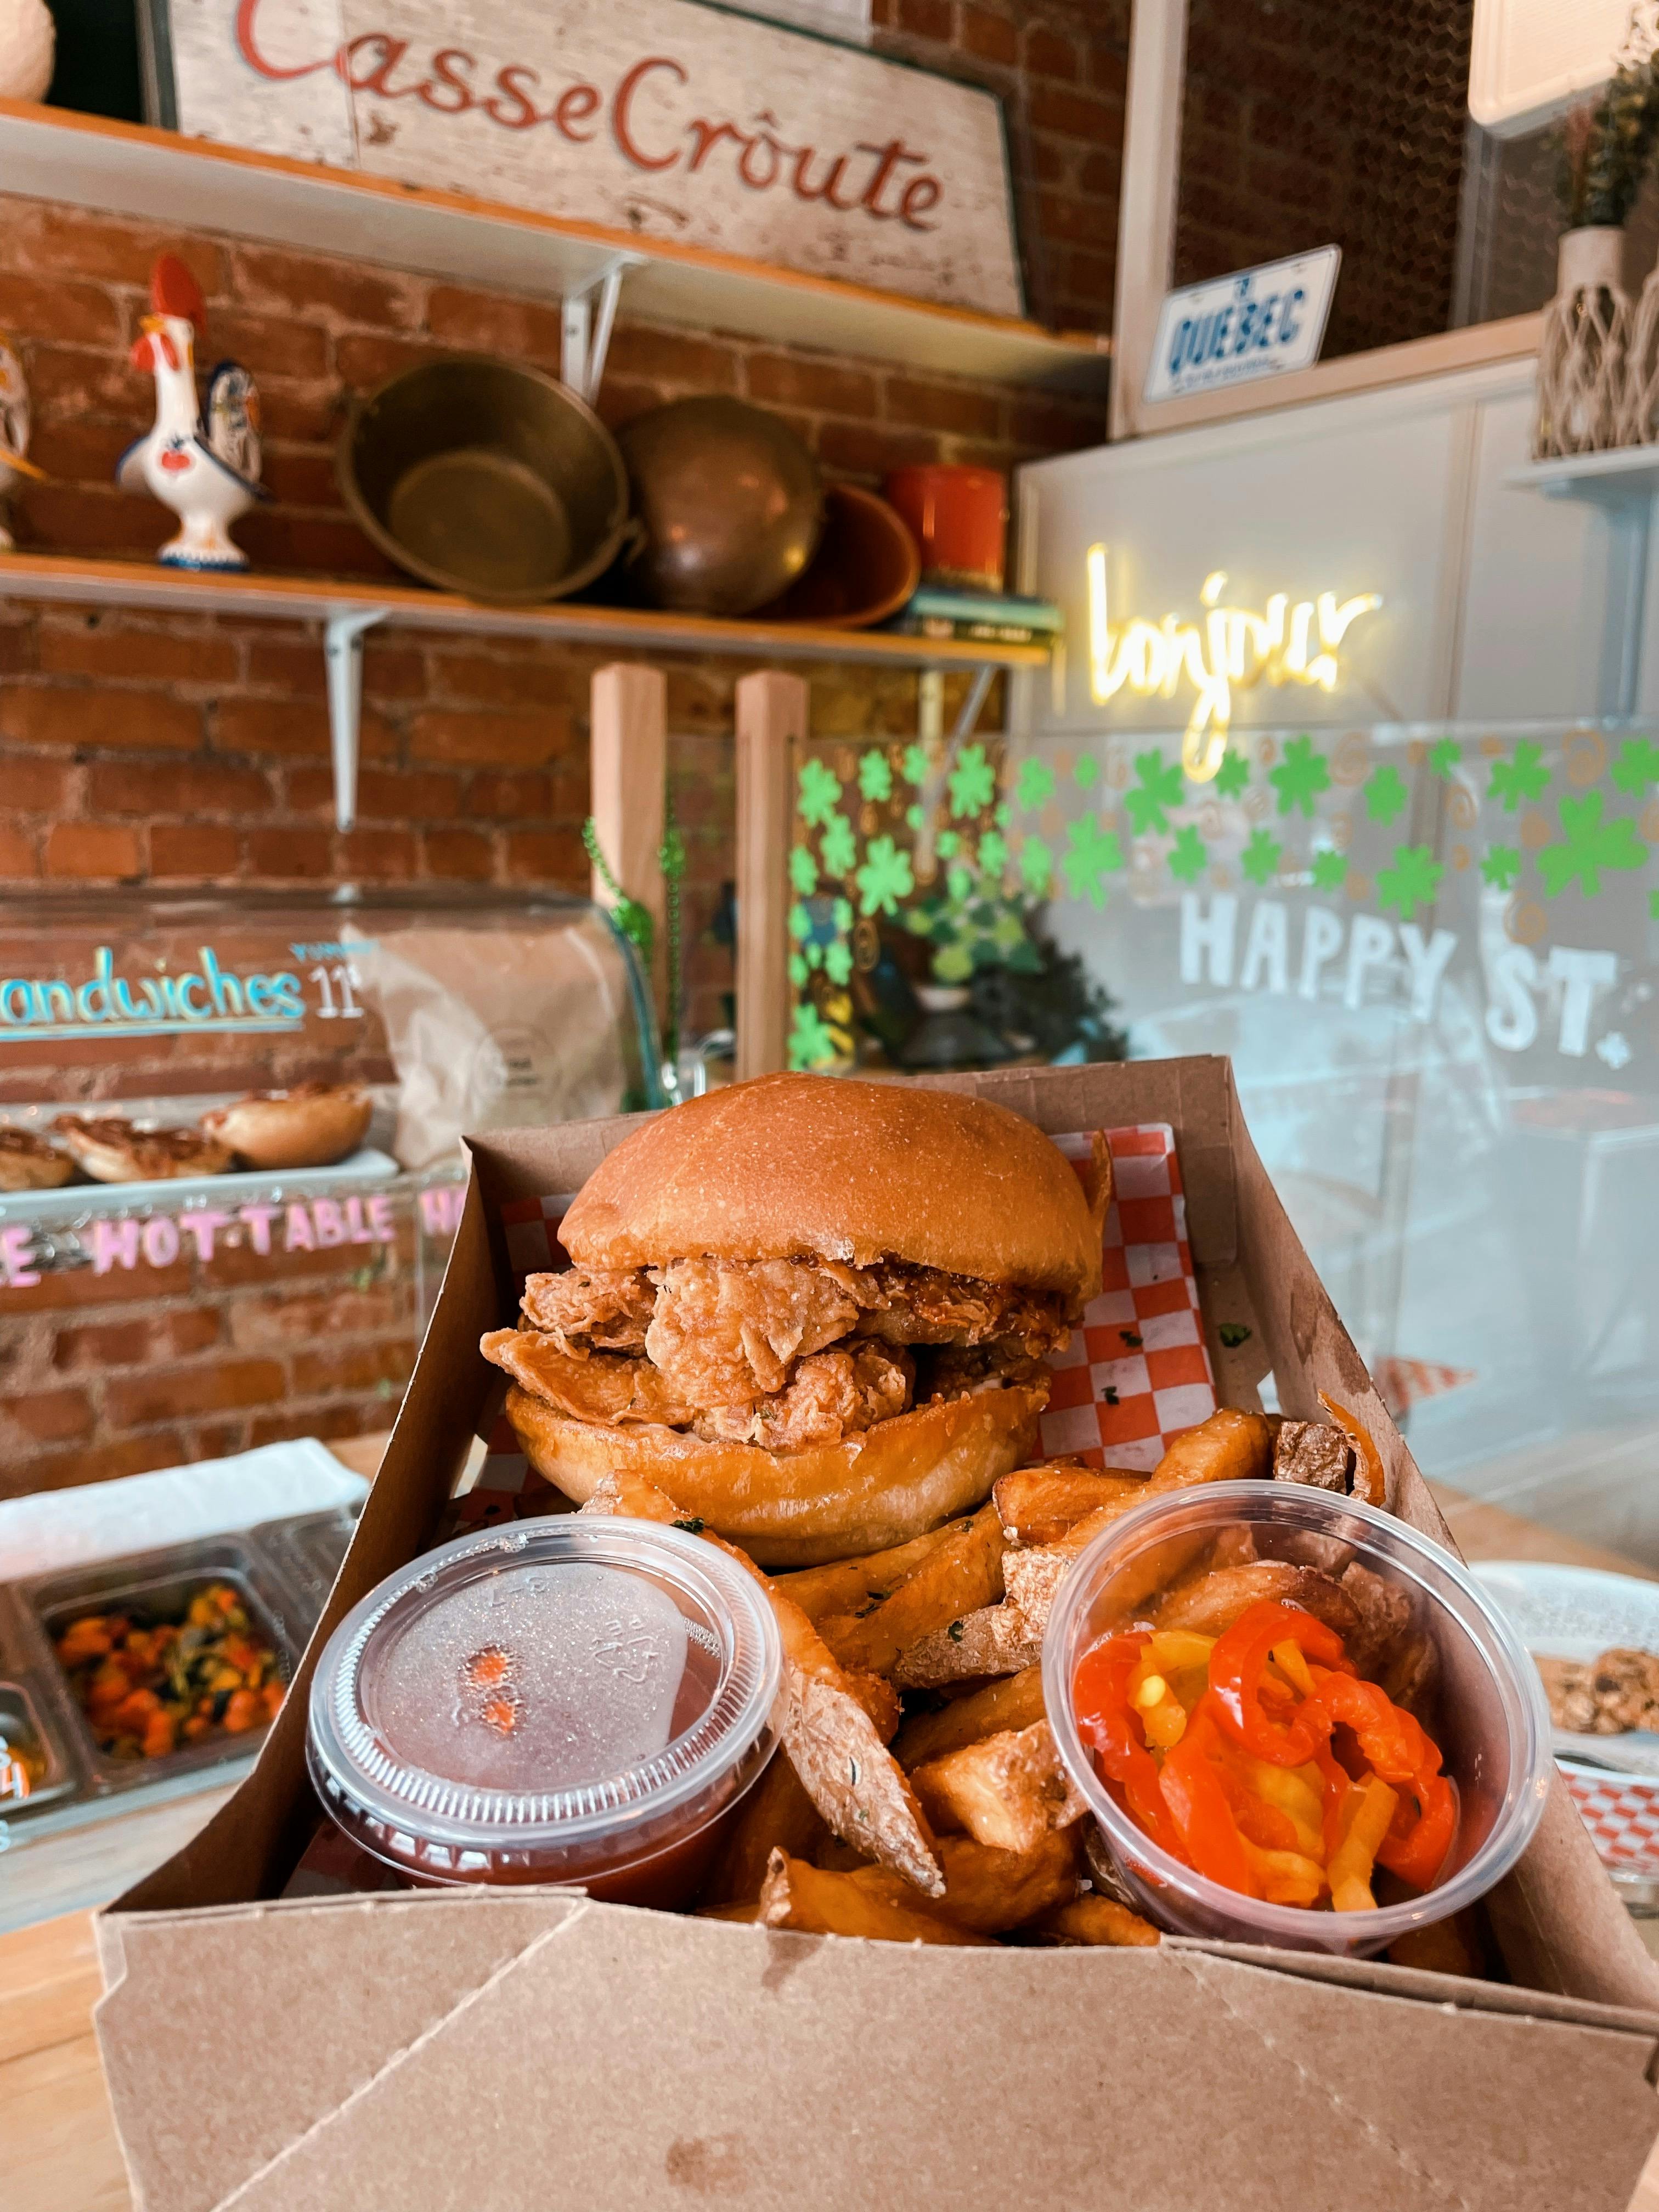 Fried chicken sandwhich with house slaw and fries ($11)